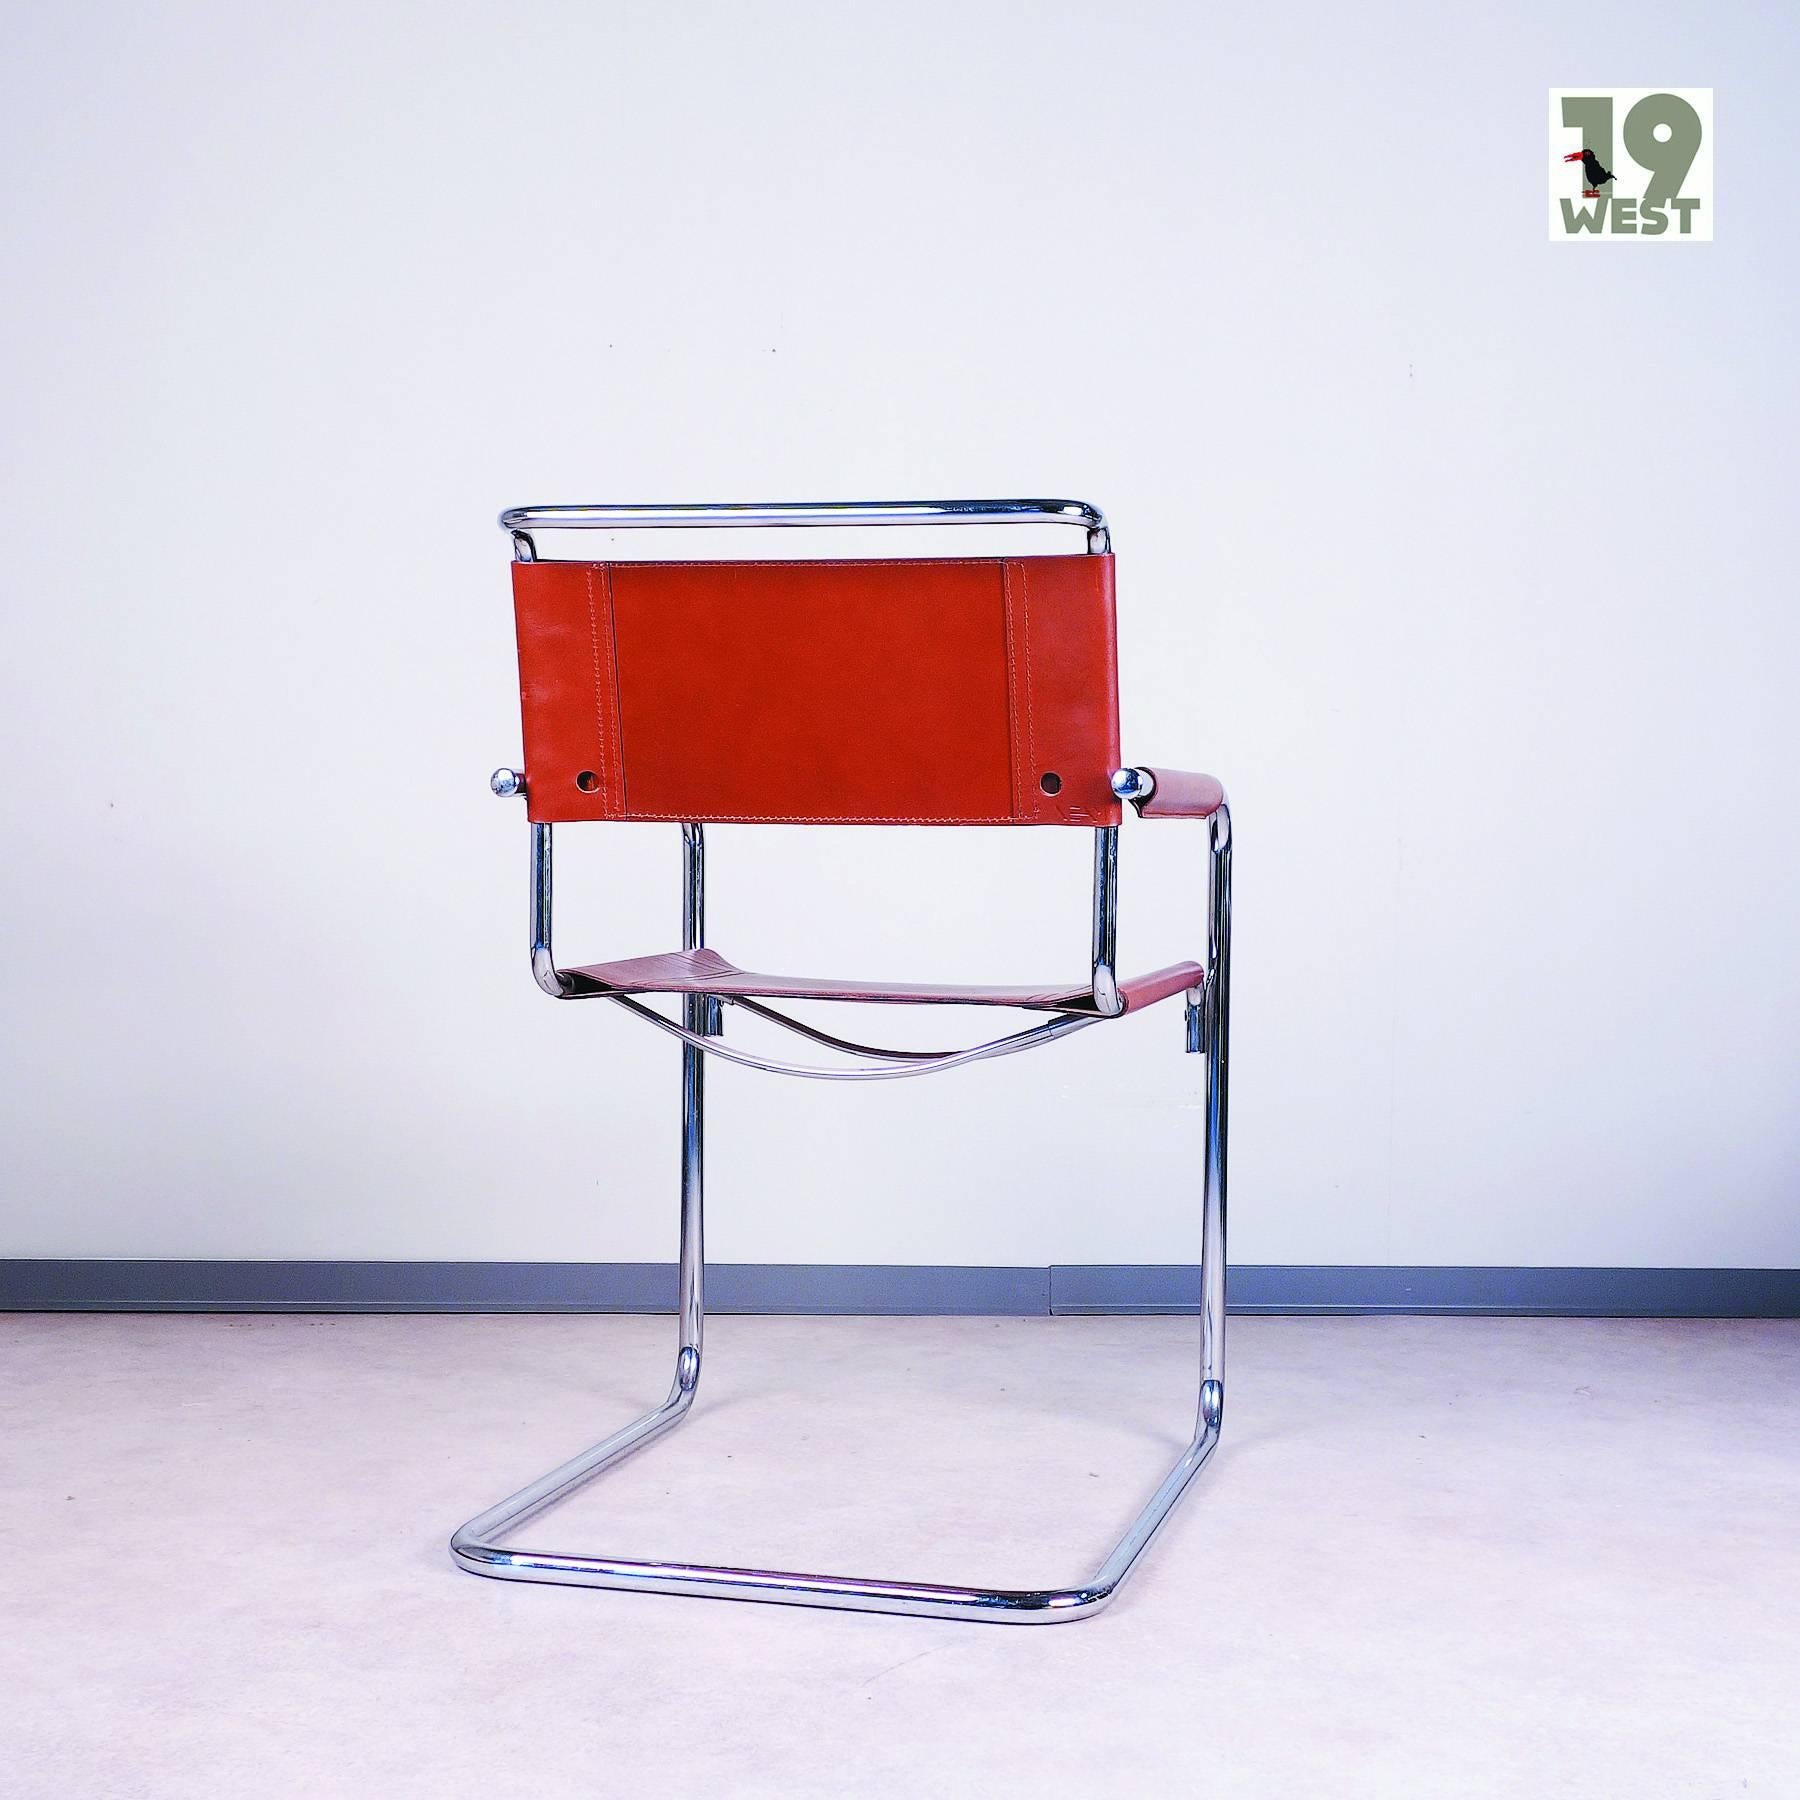 Italian Tubular Steel Cantilever Chair by Linea Veam, 1980s For Sale